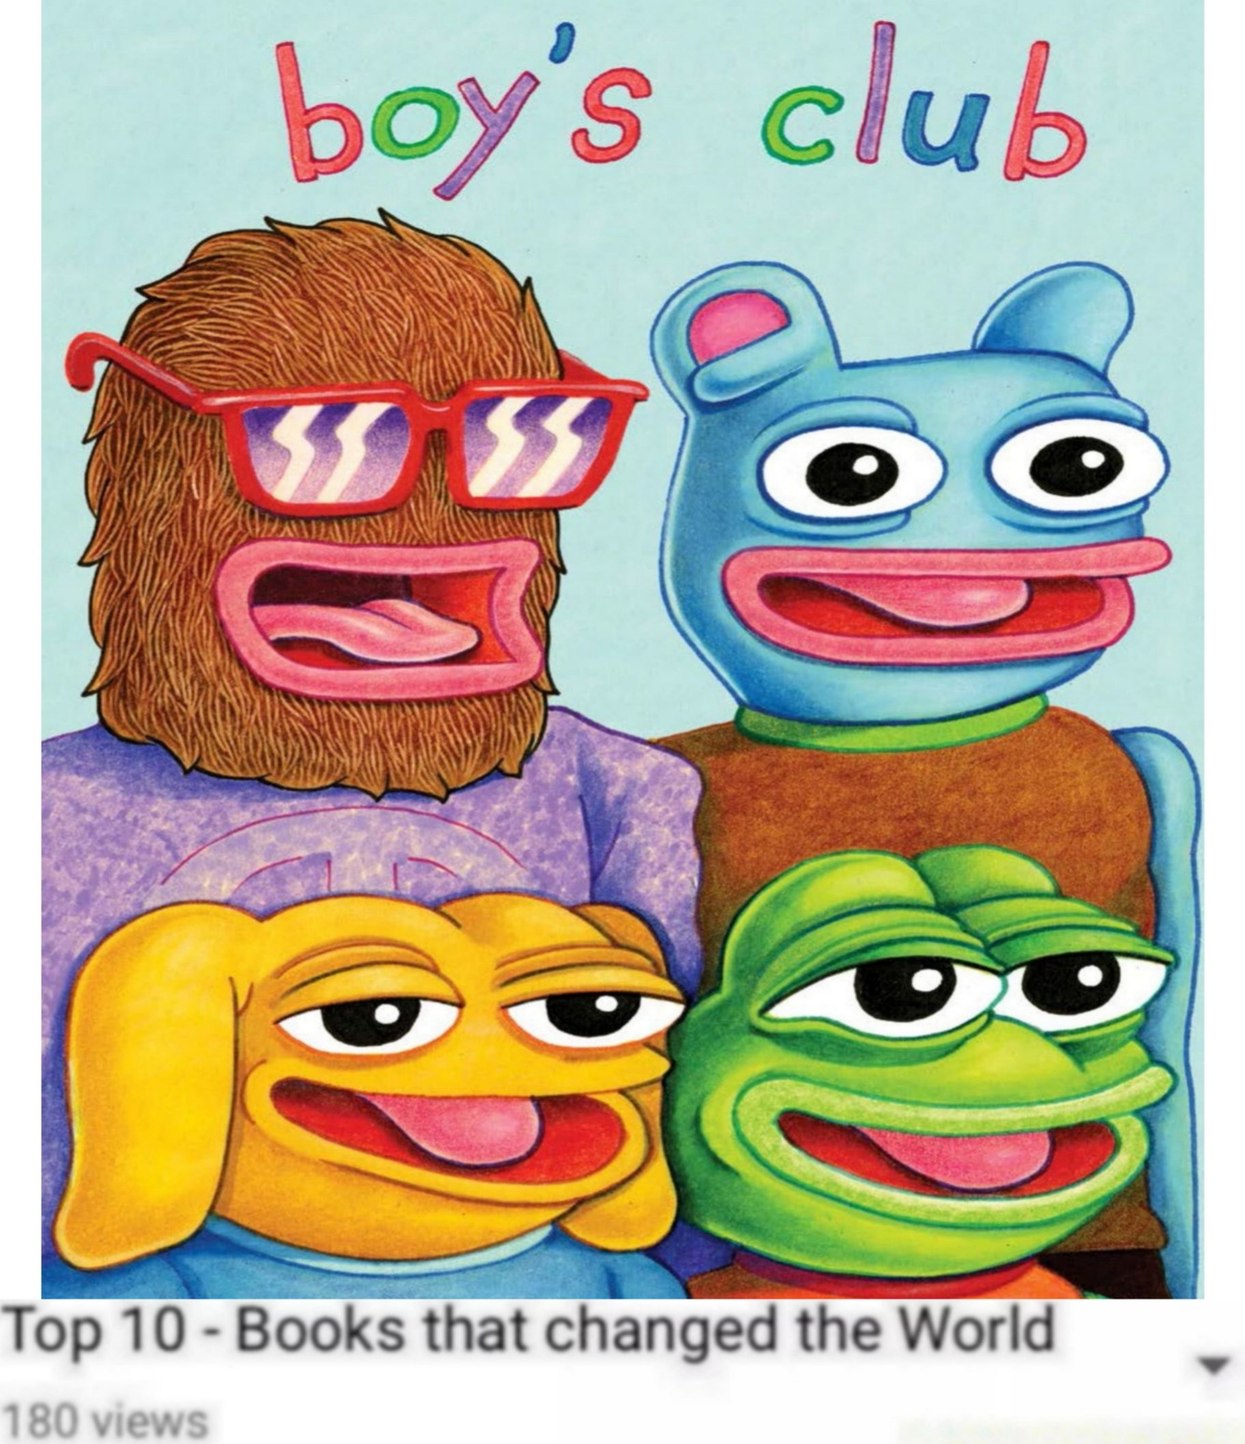 great book tbh - meme